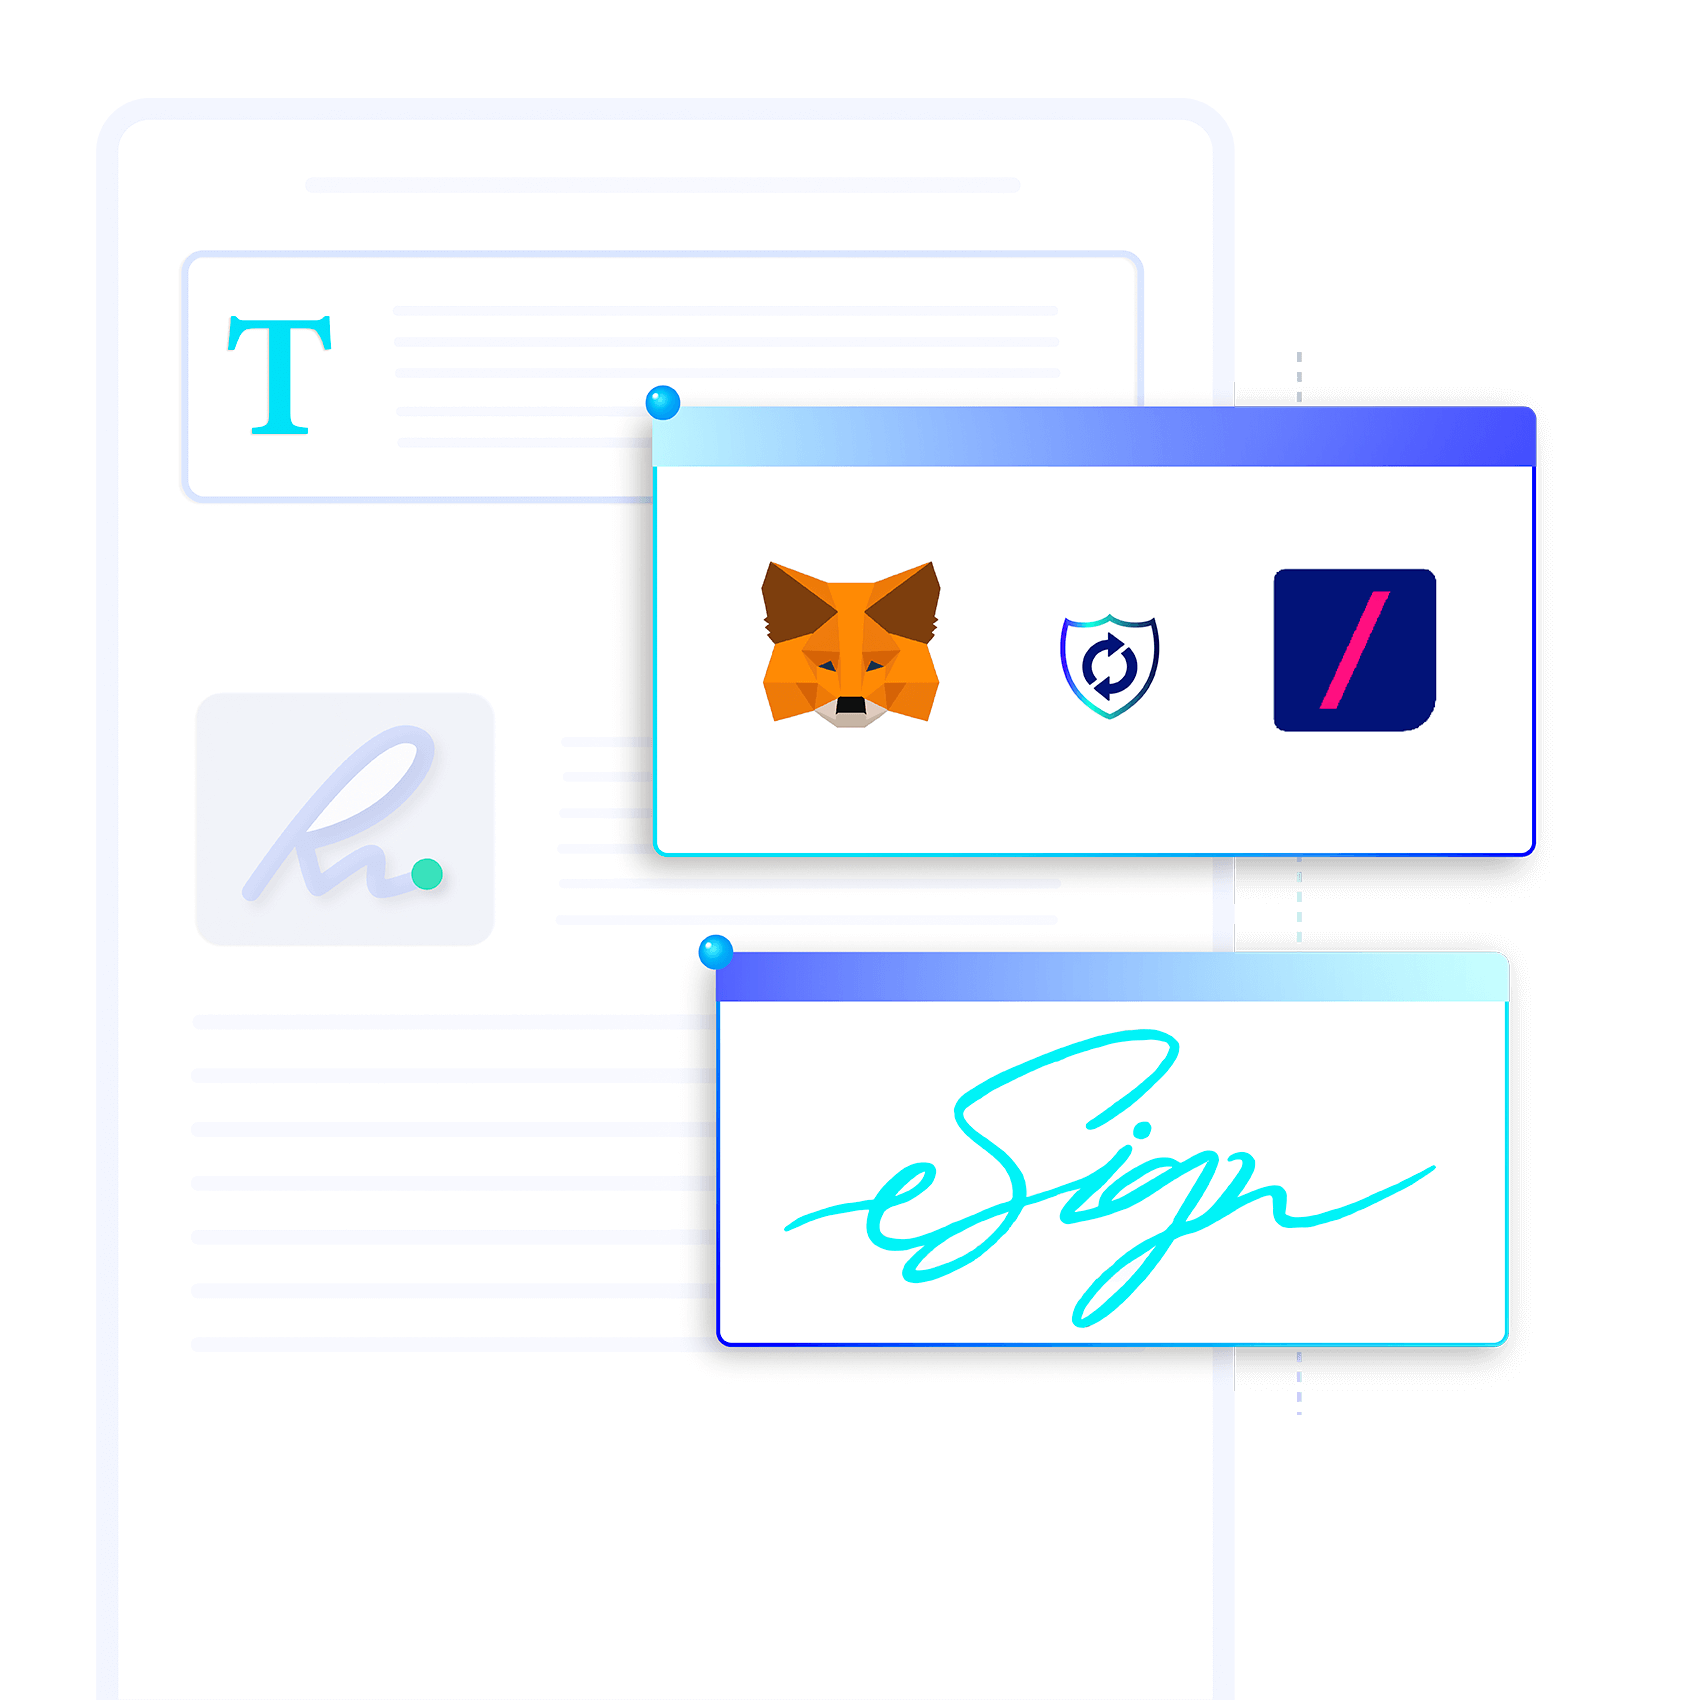 Revv, document automation & esignature tool, empowers you to sign documents securely with MetaMask wallet in a few clicks